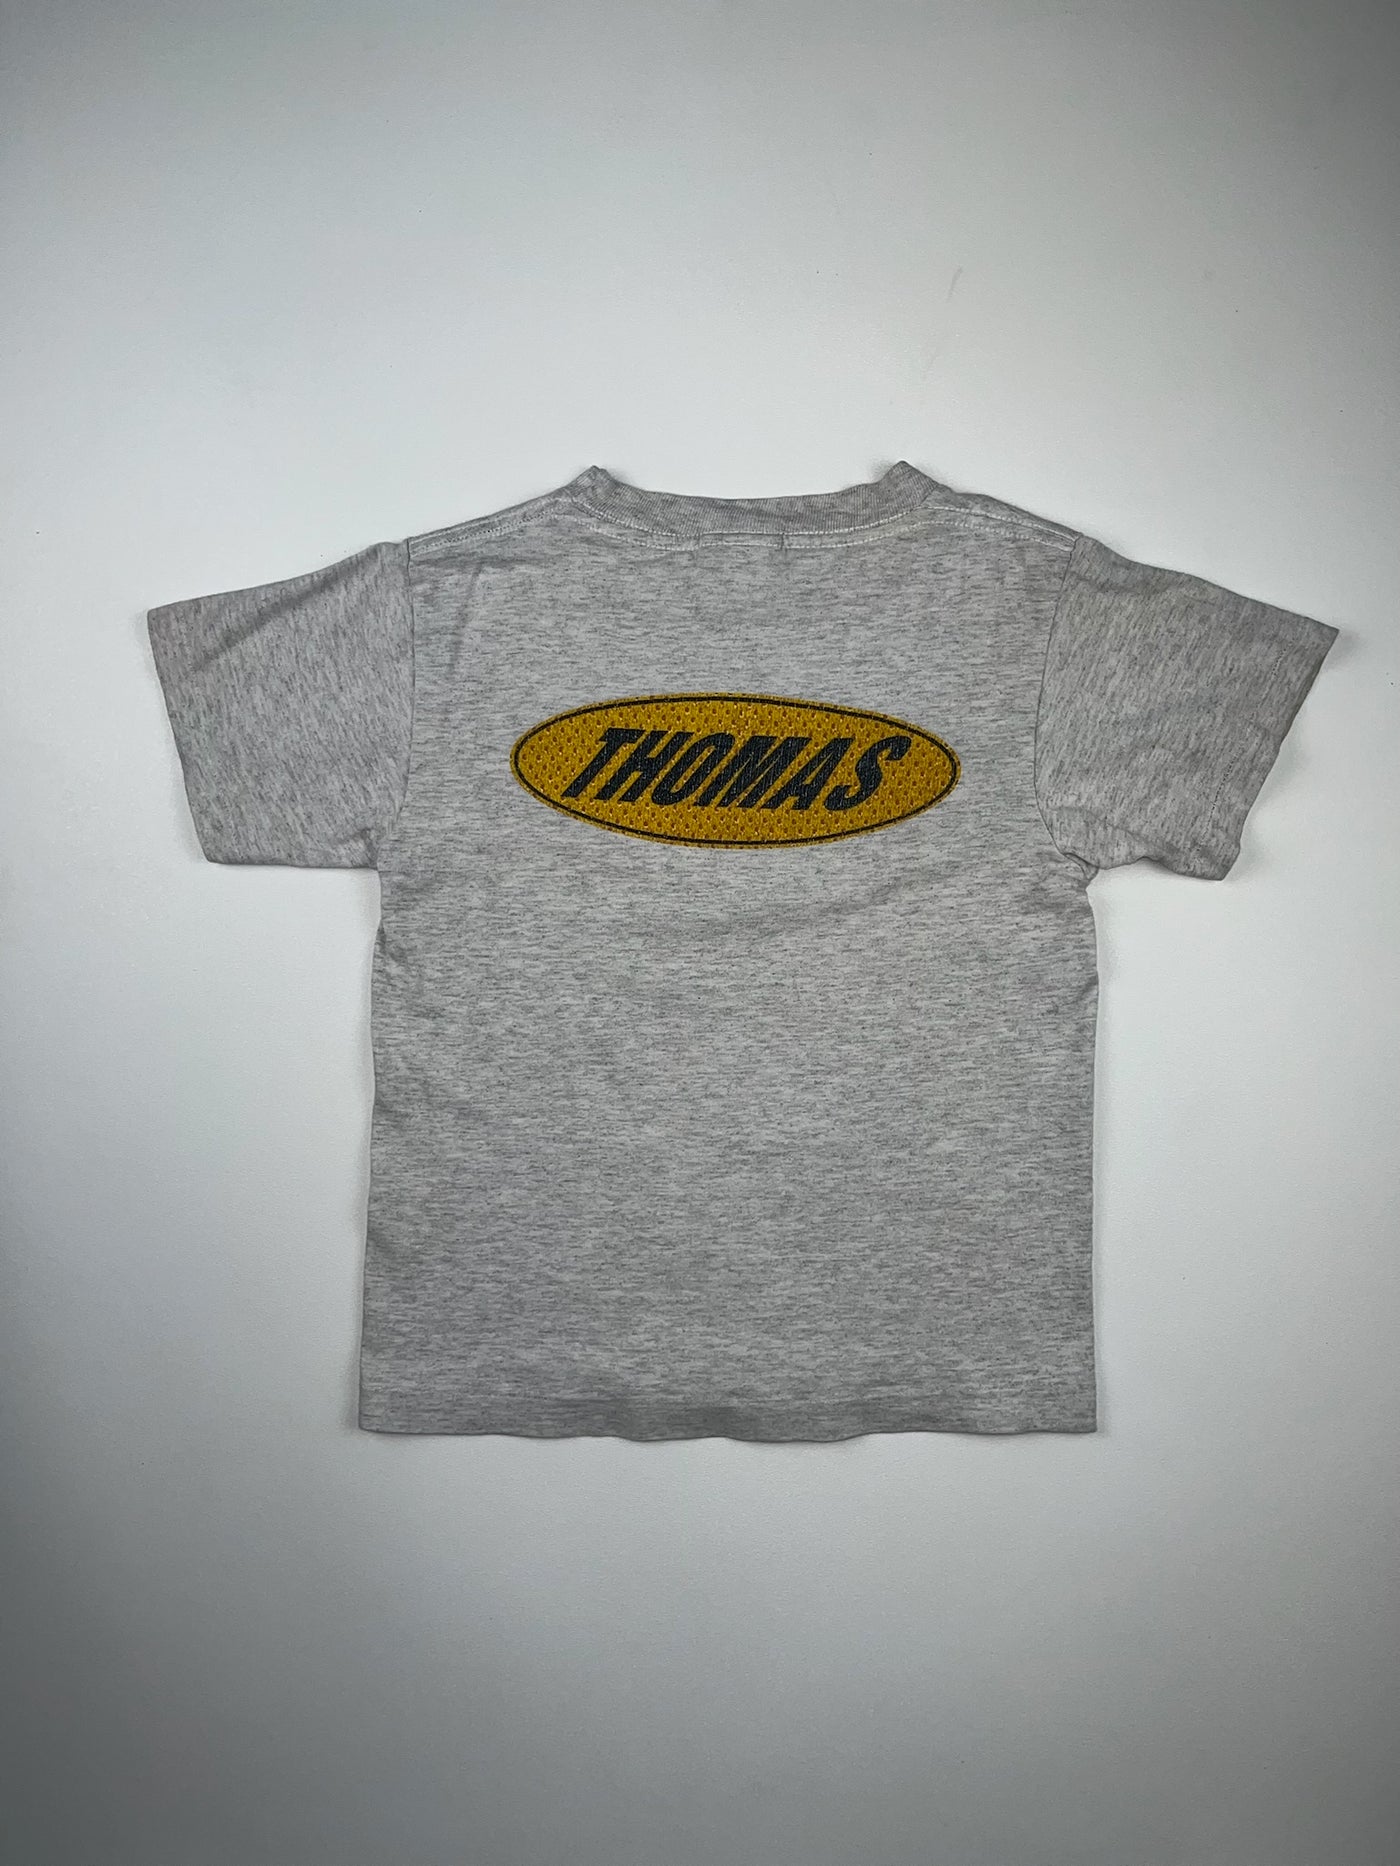 Vintage Thomas and Friends T-Shirt 5/6